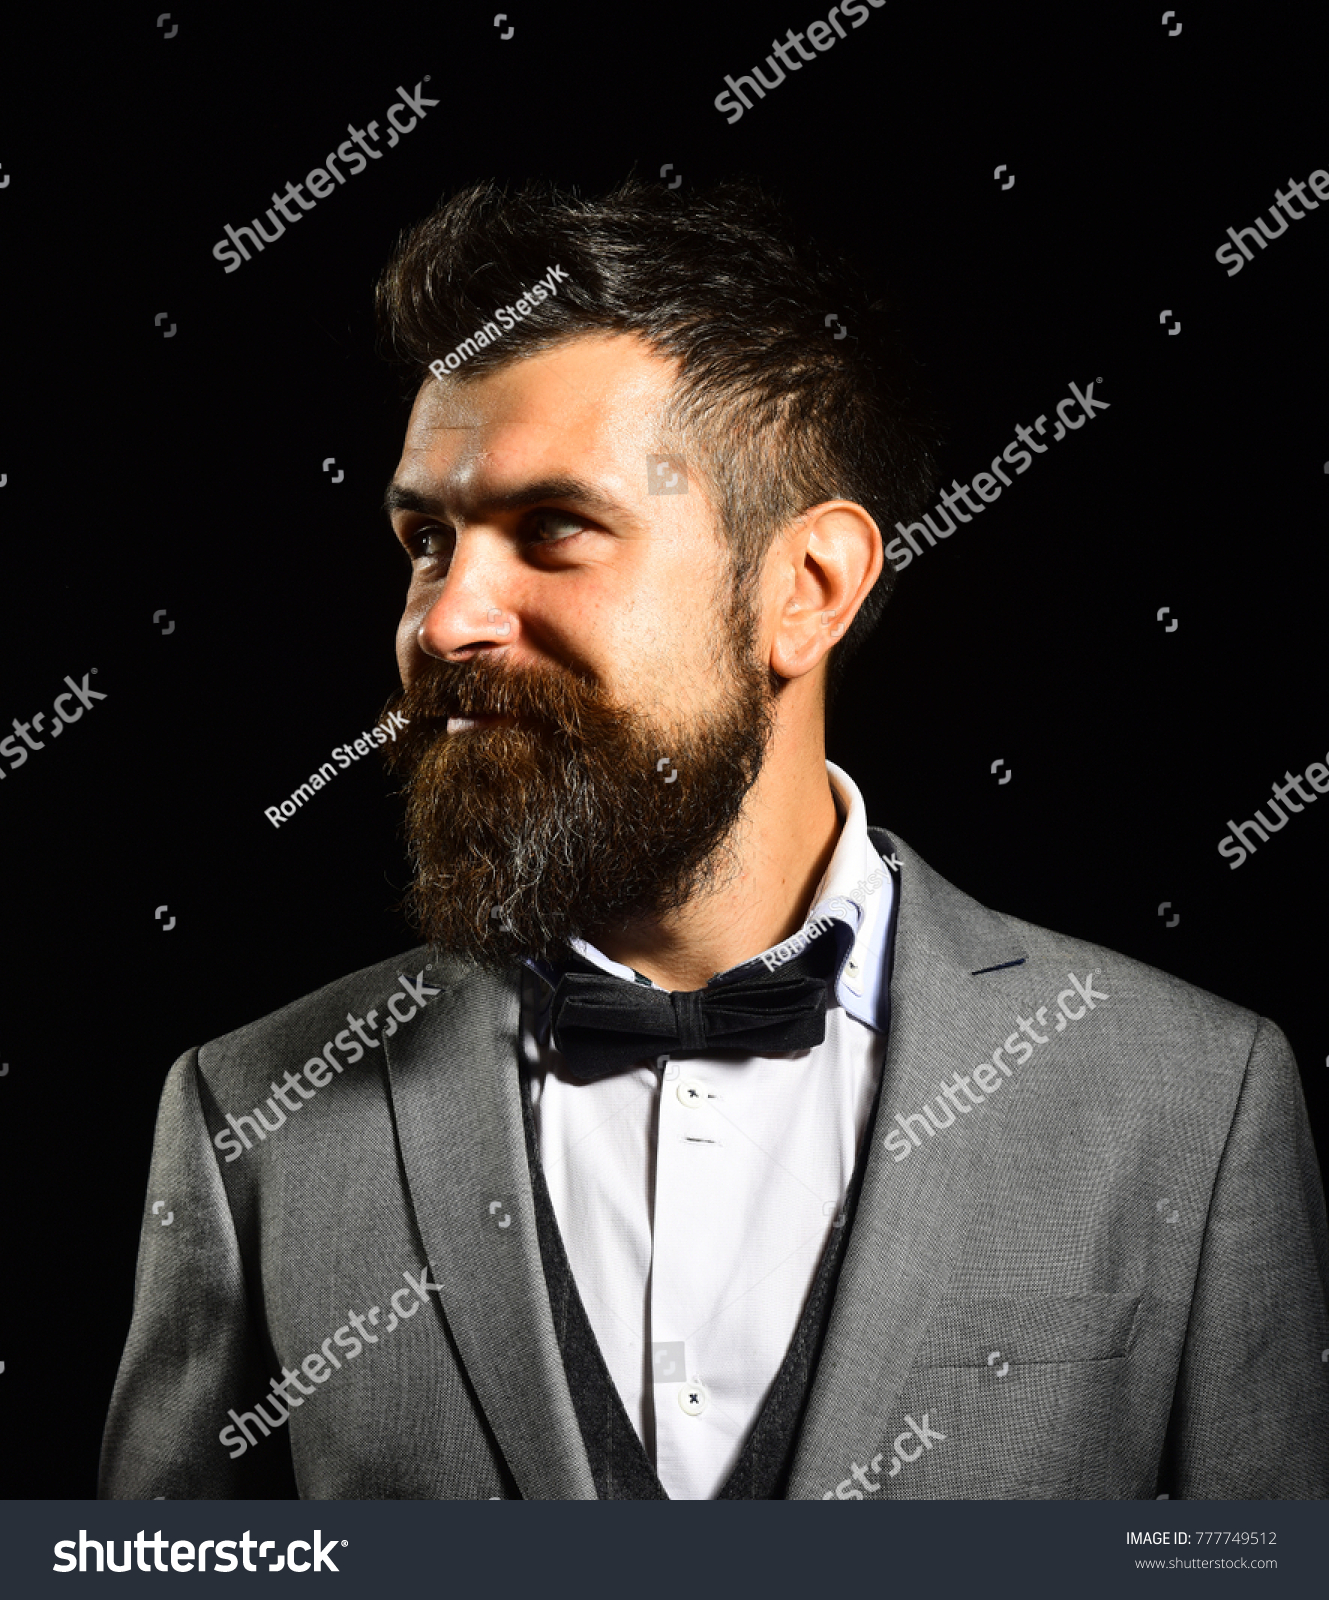 Macho Formal Suit Has Stylish Haircut Stock Photo Edit Now